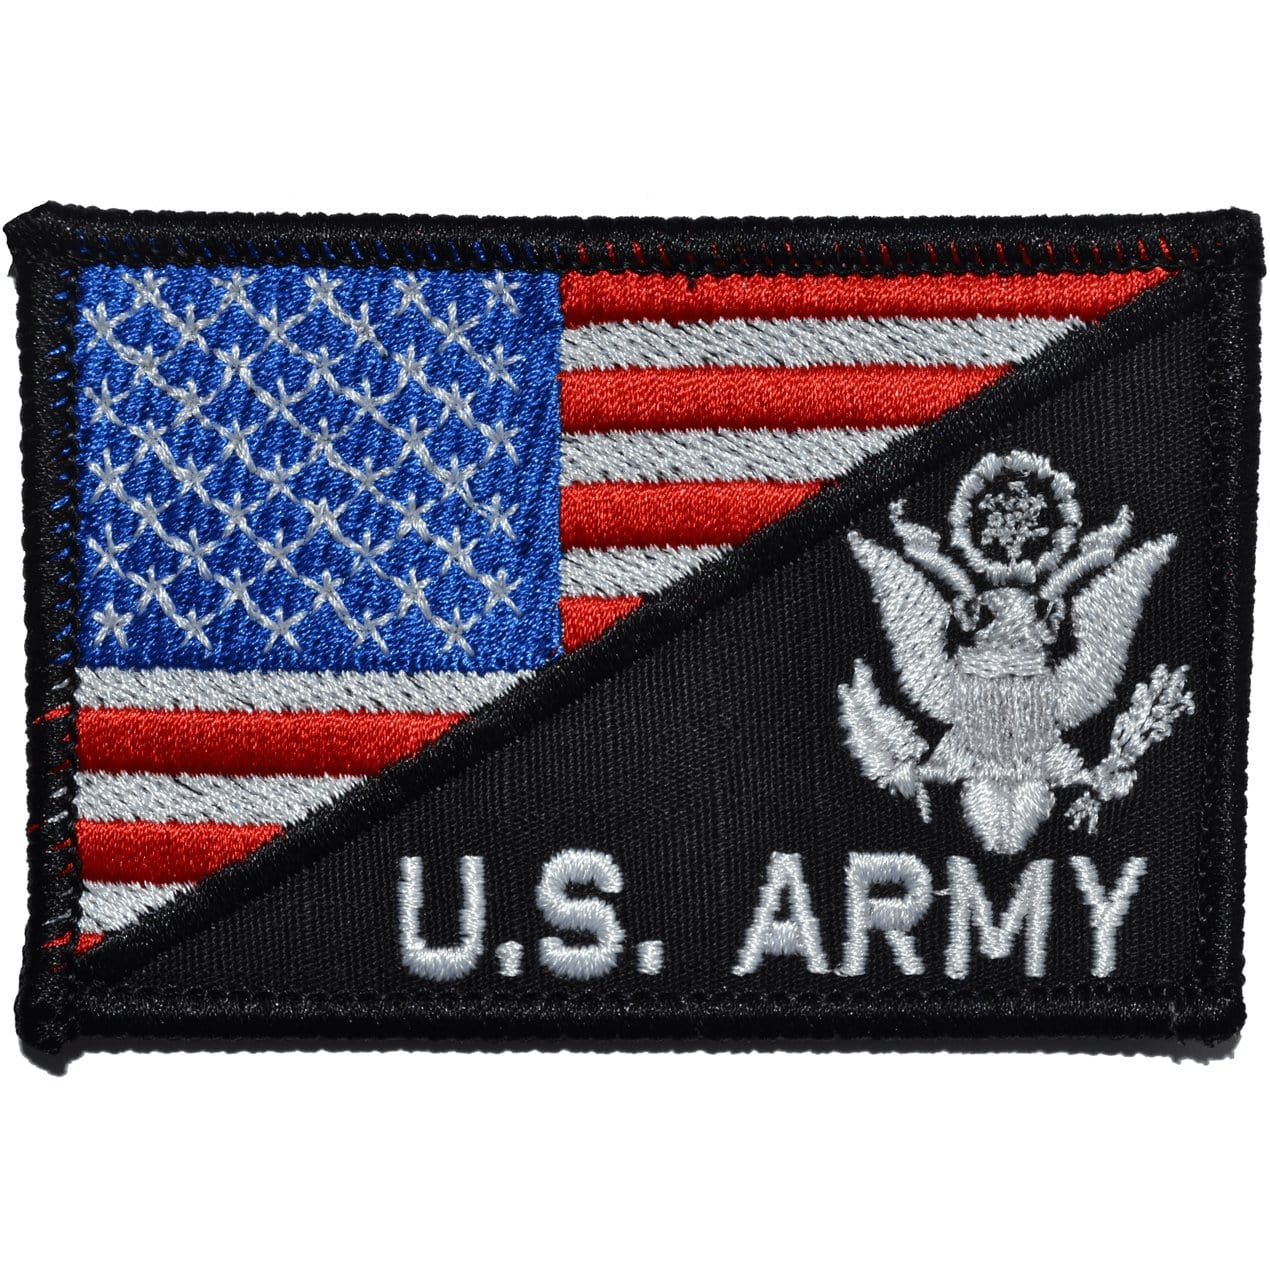 US Army Crest With Text USA Flag - 2.25x3.5 Patch